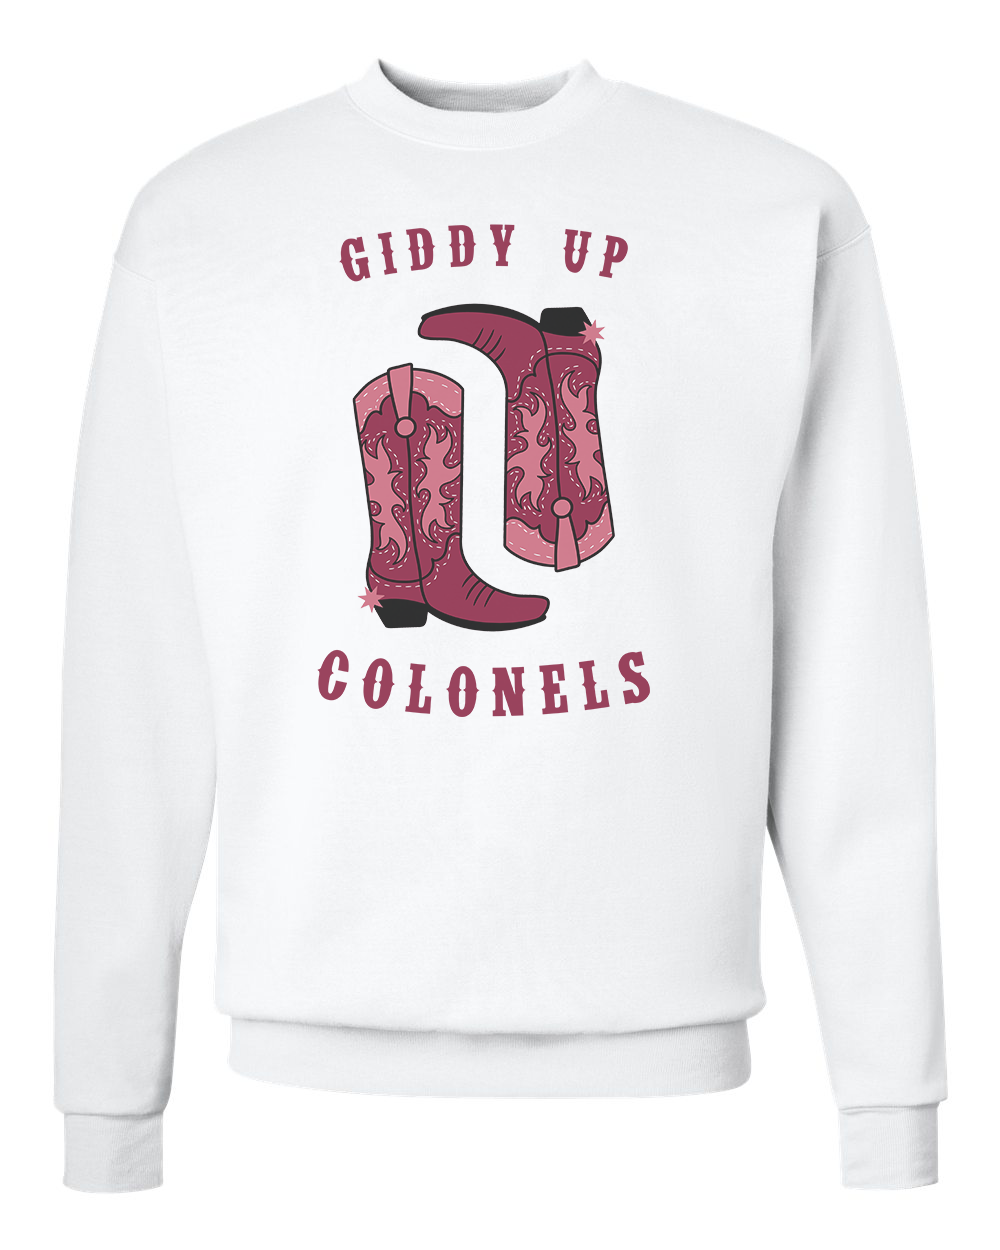 Giddy Up Colonels Crew